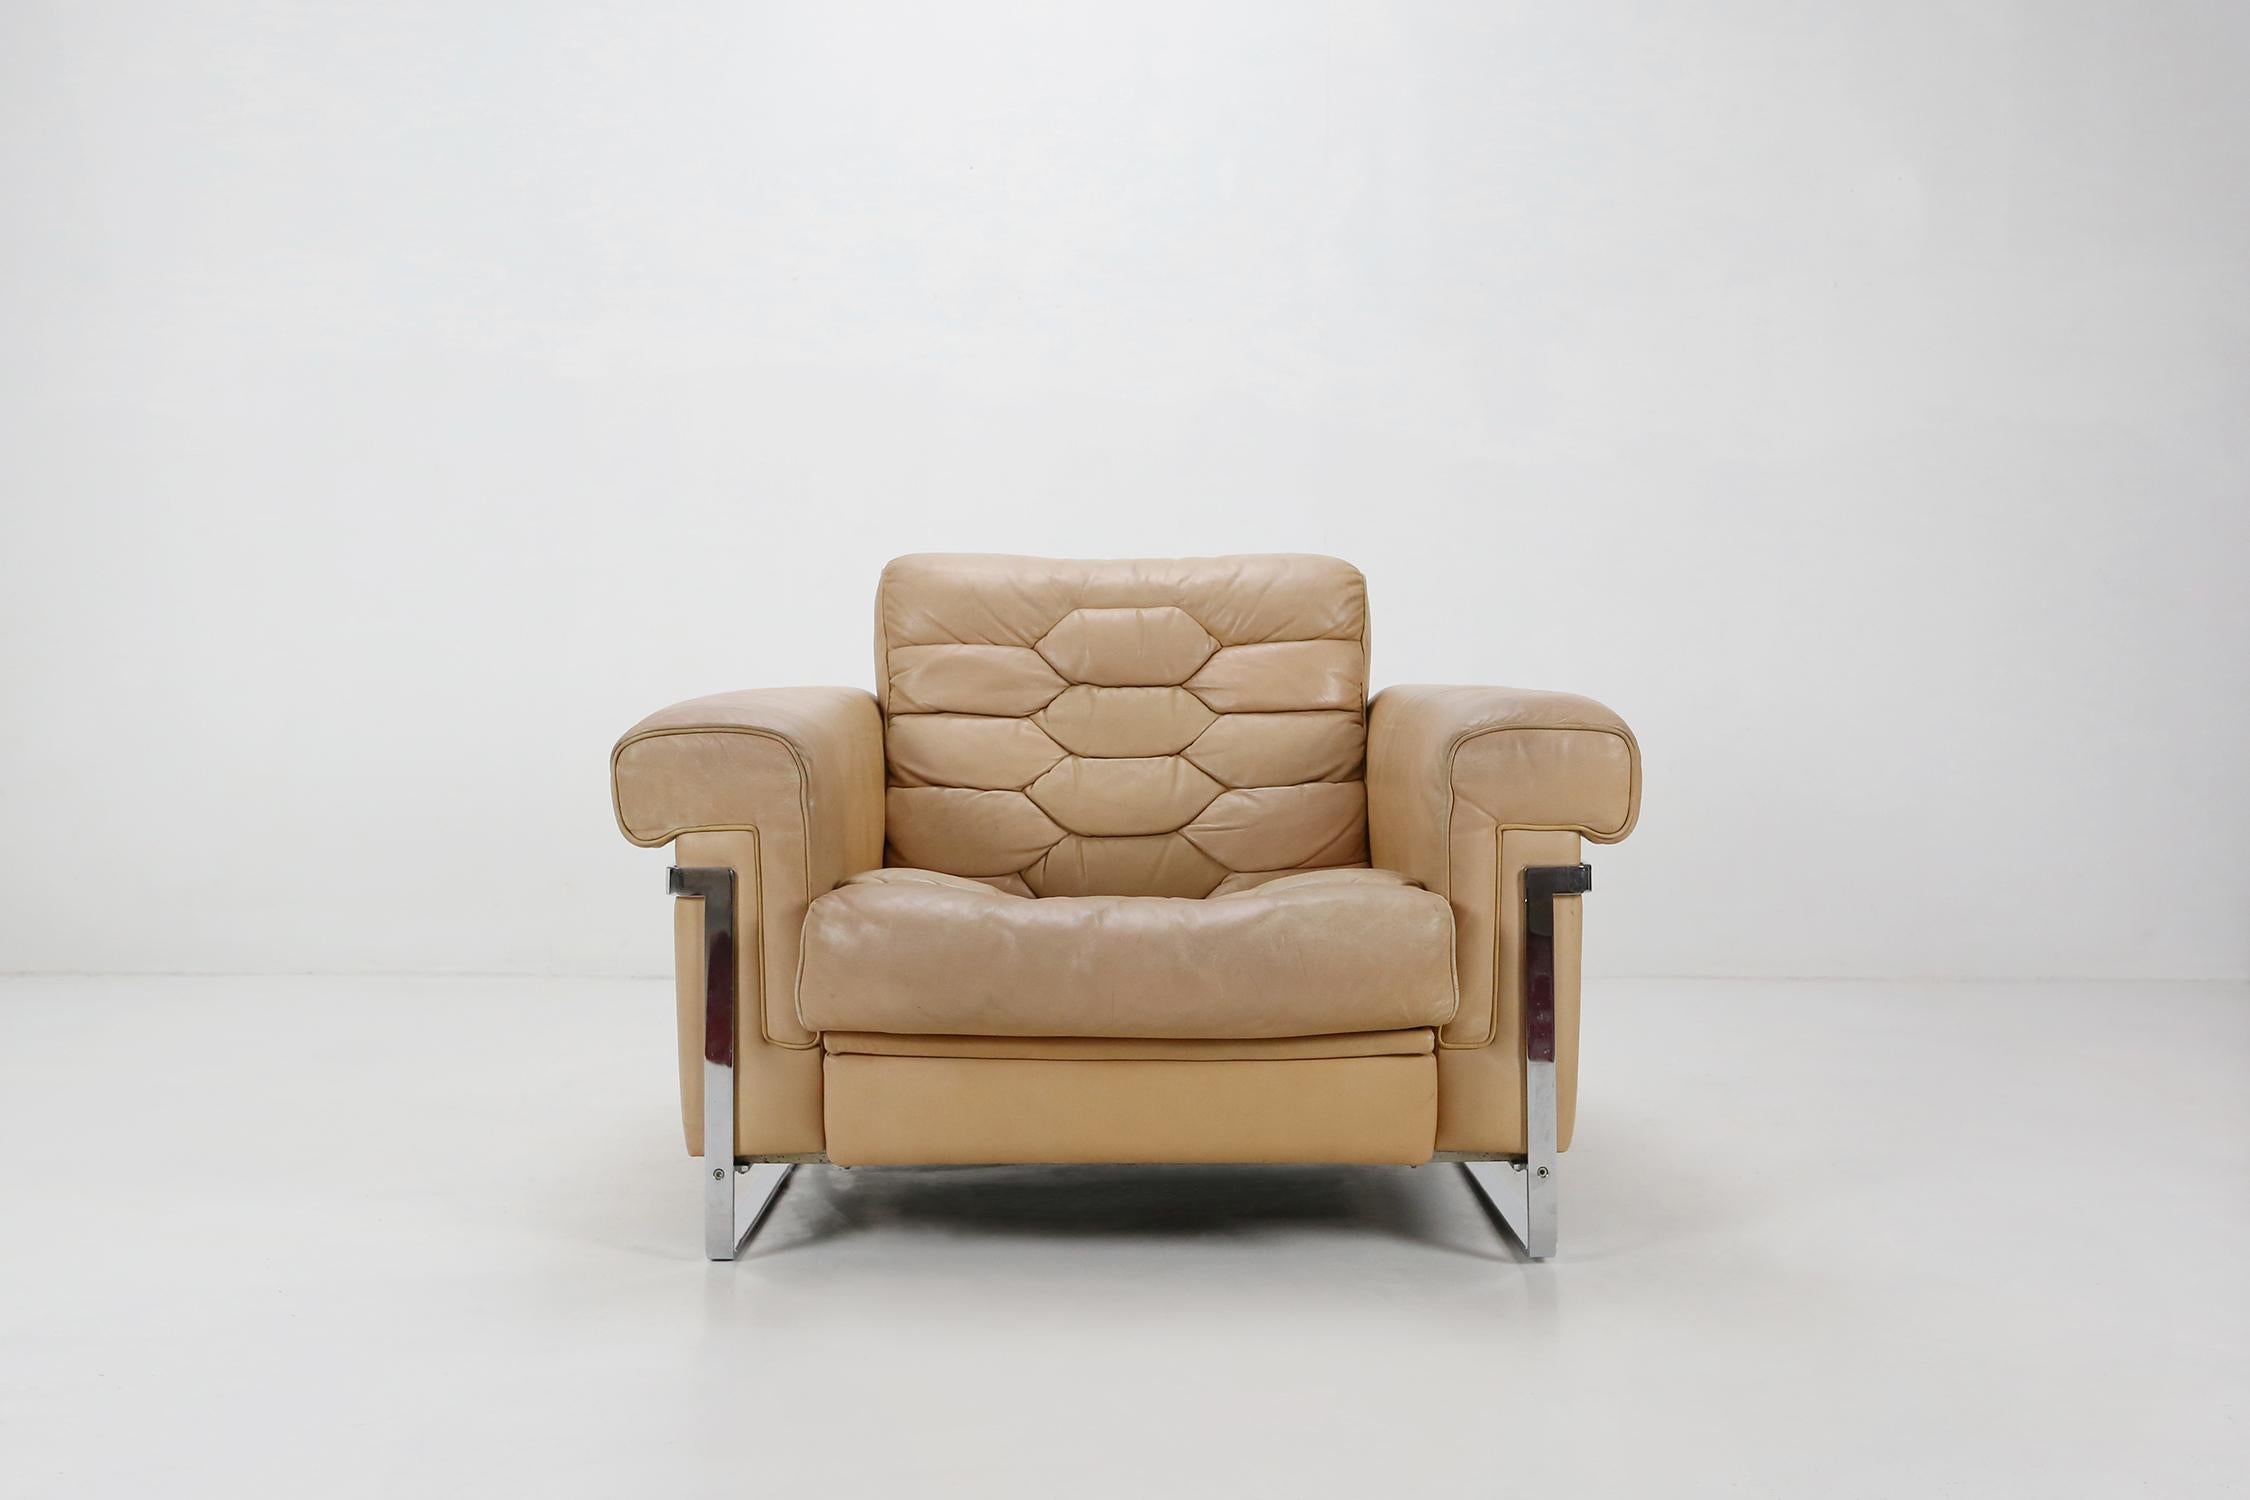 Club chair by designer Robert Haussmann for De Sede. Has a beige color that is slightly discoloration and is extensible for more seating comfort. This model DS-P with honeycomb structure is extremely rare. The chrome metal base is completely